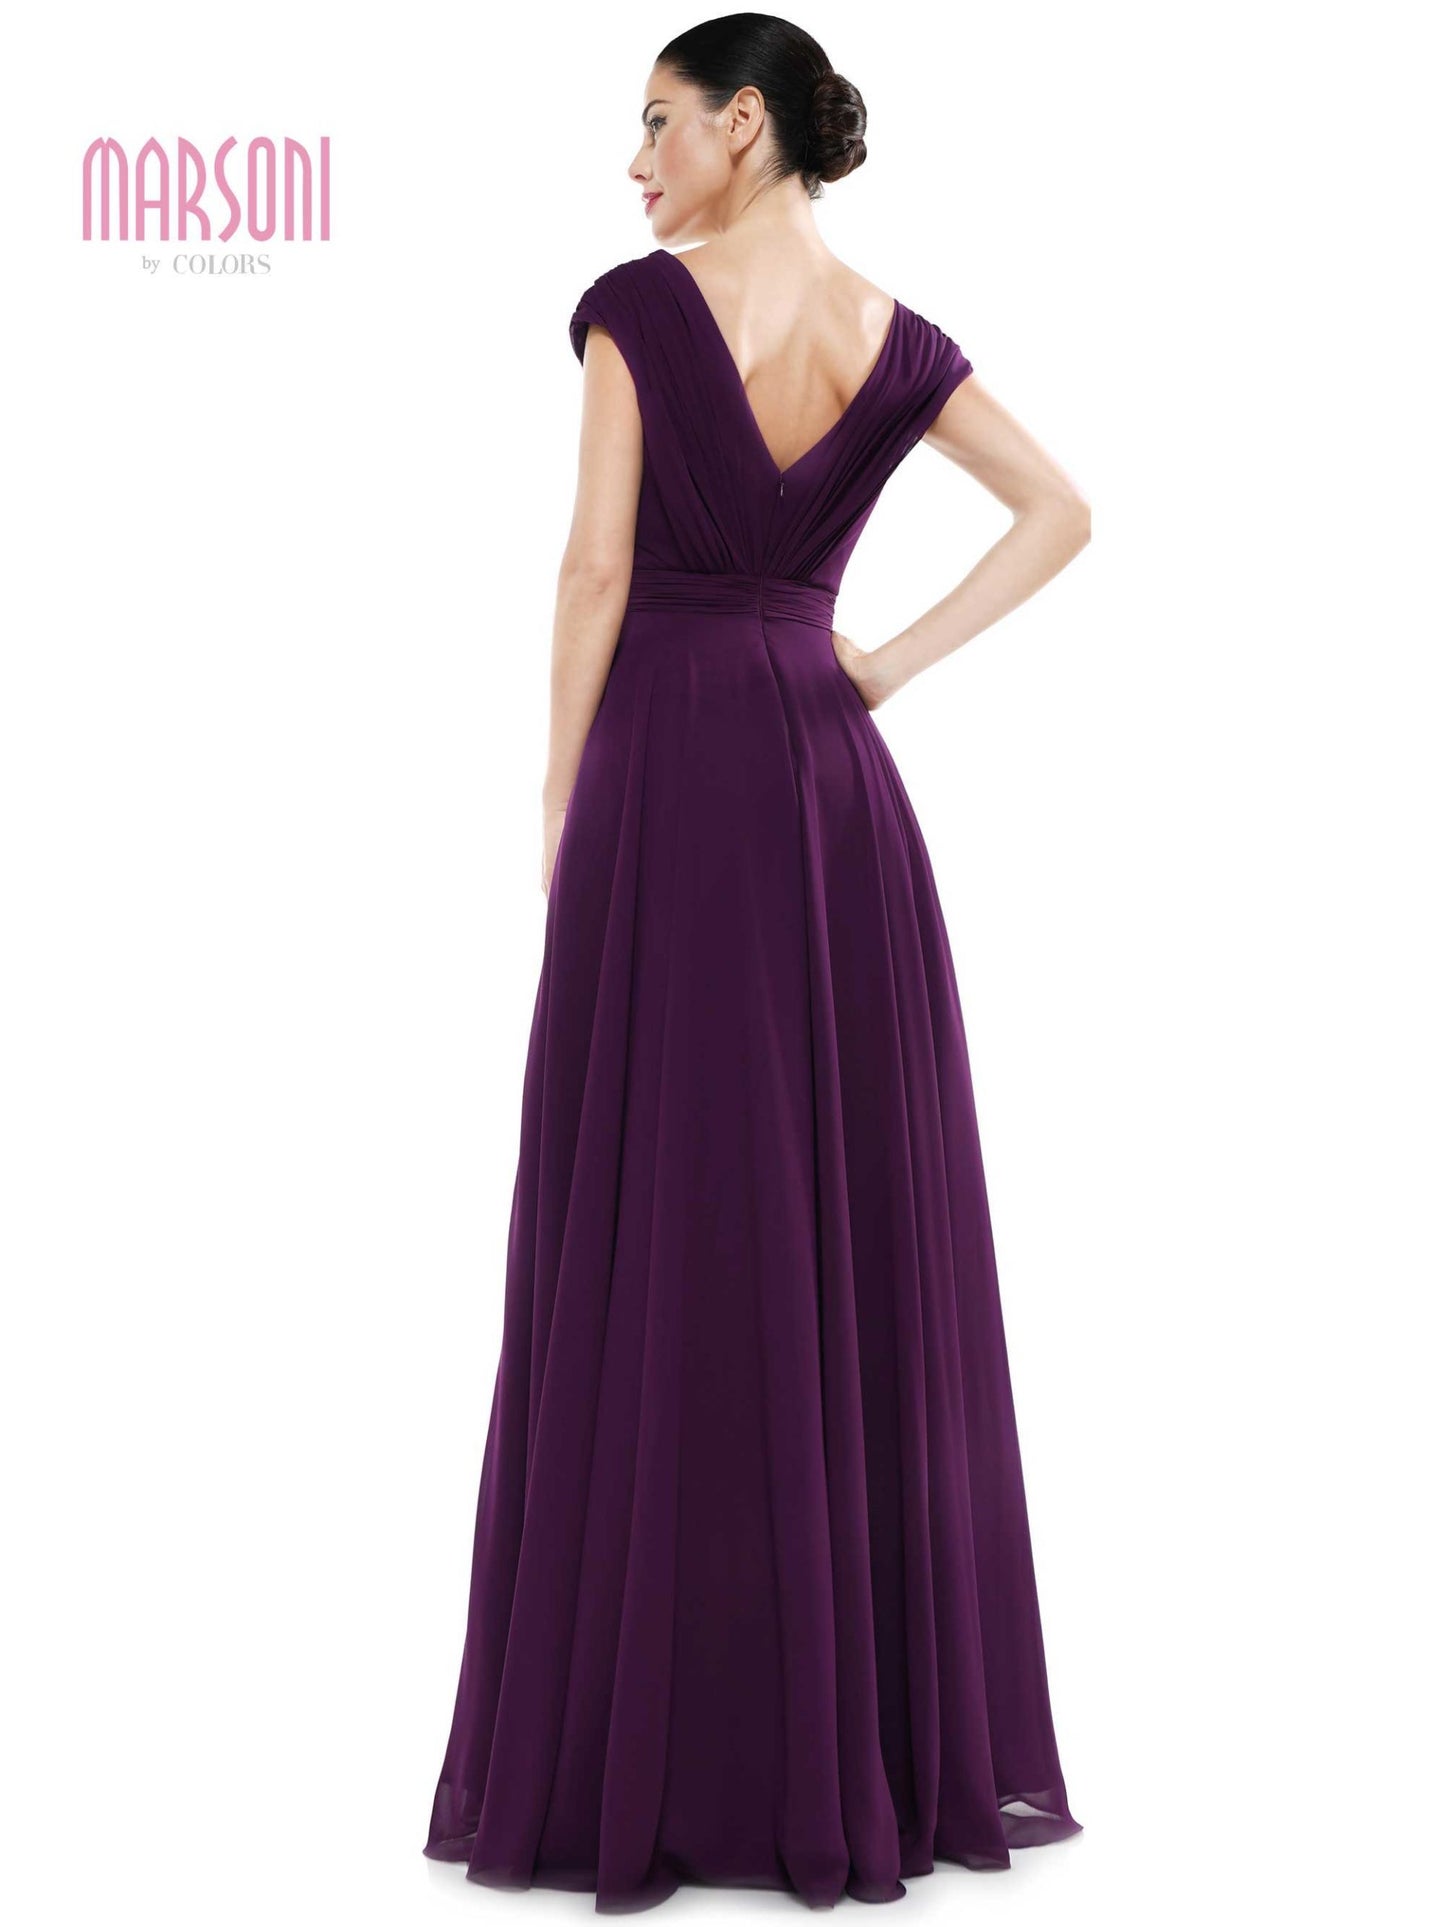 Marsoni Mother of the Bride Long Formal Dress 251 - The Dress Outlet Eggplant